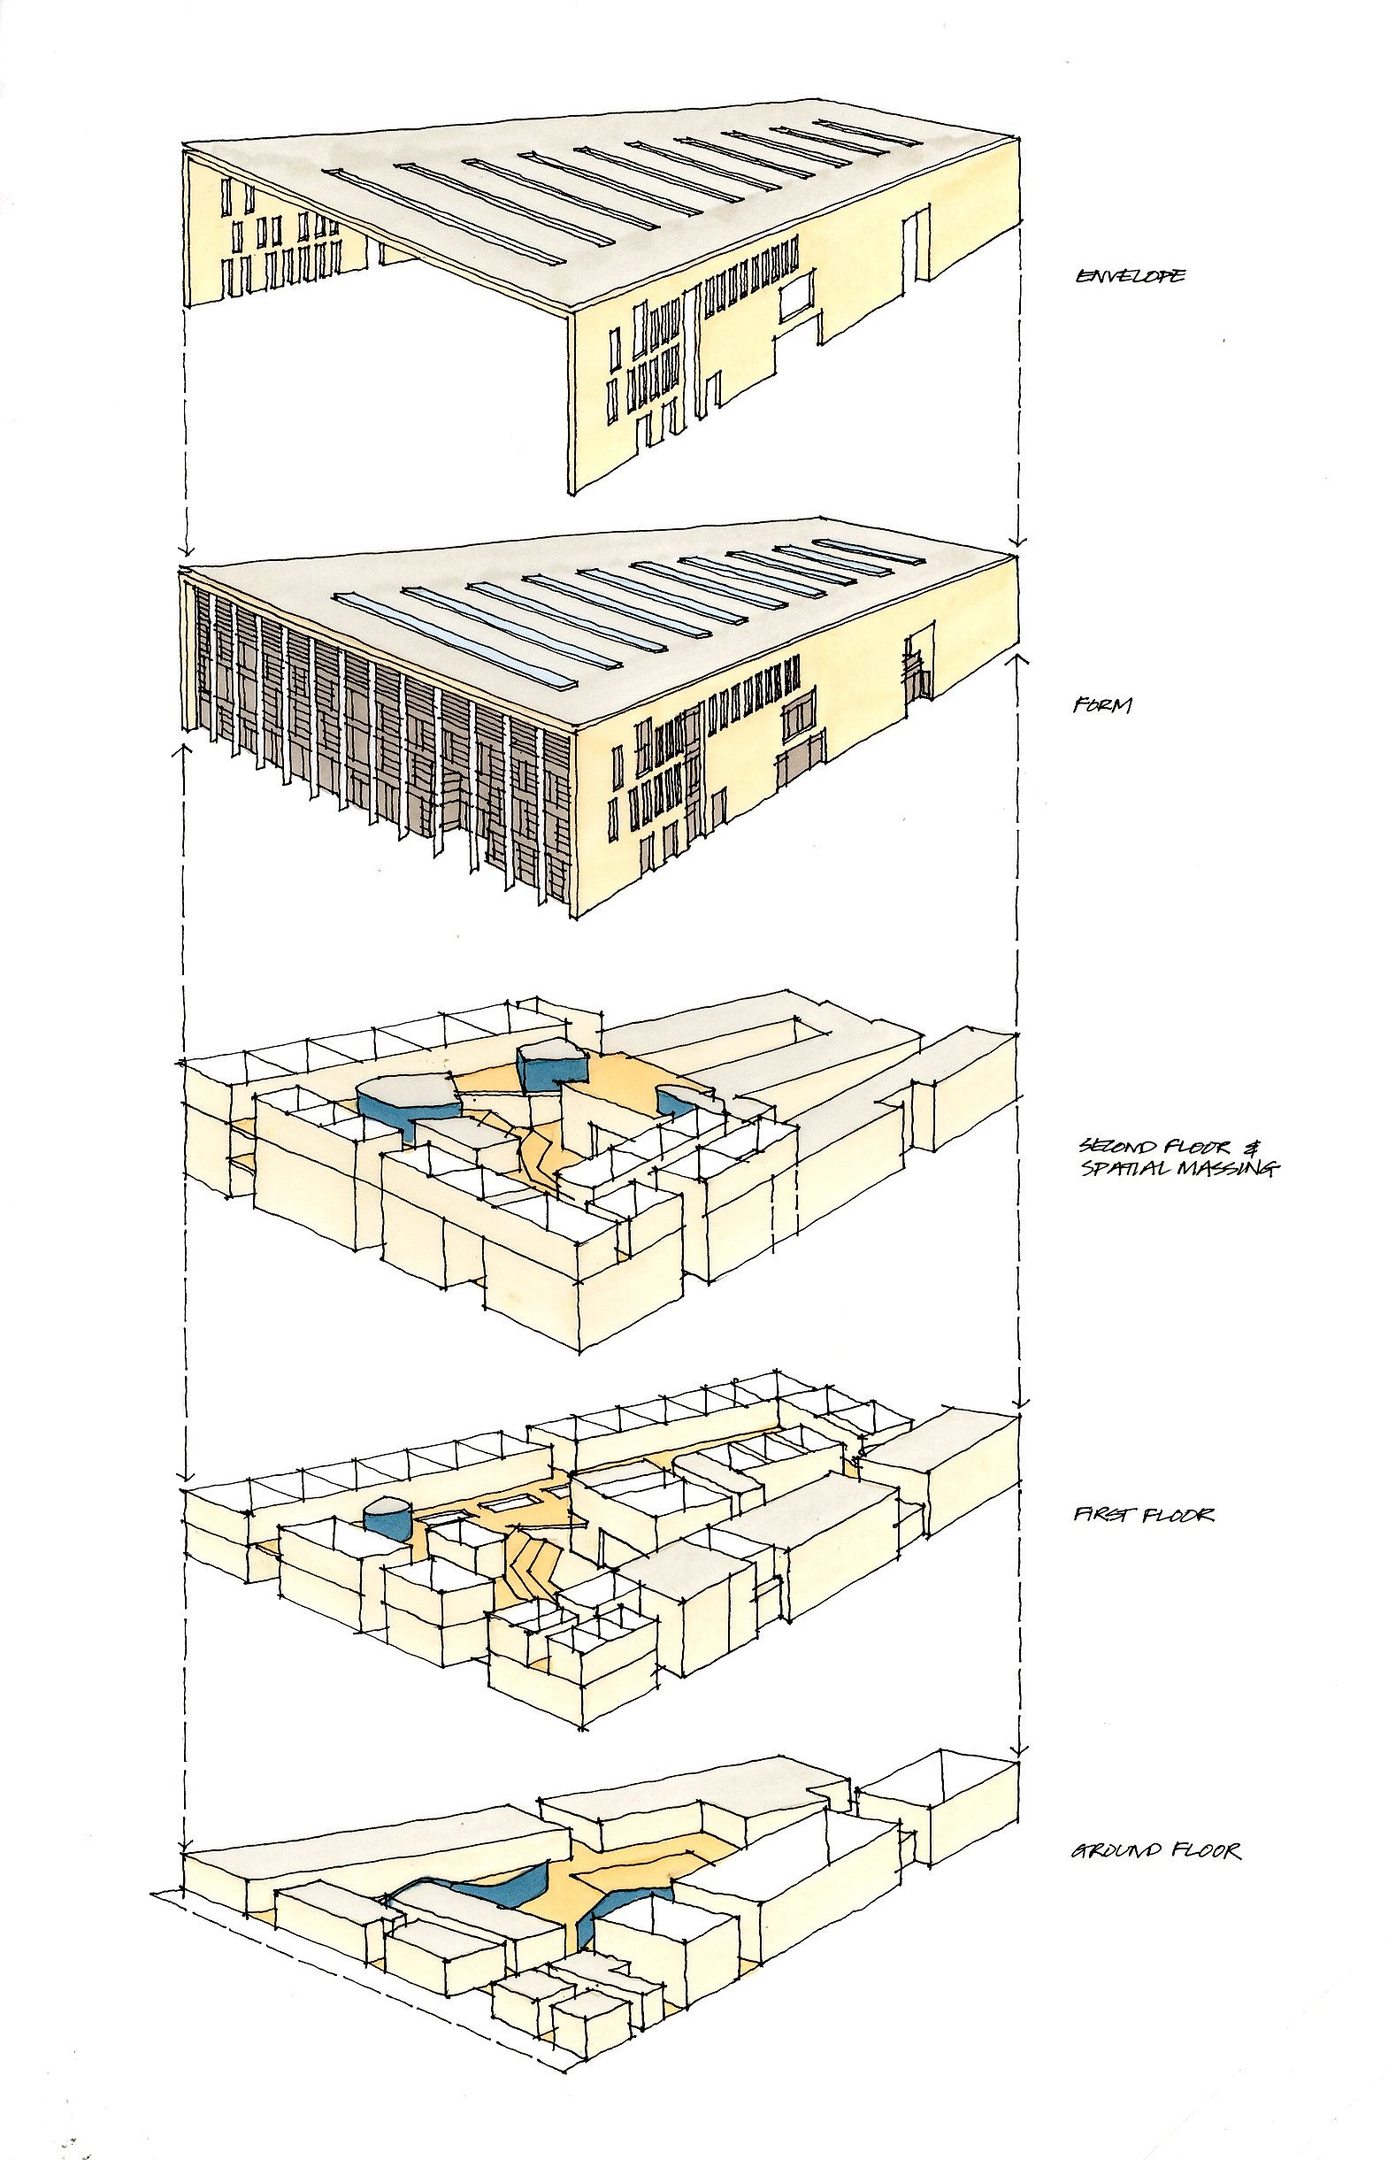 Plans for the new school.